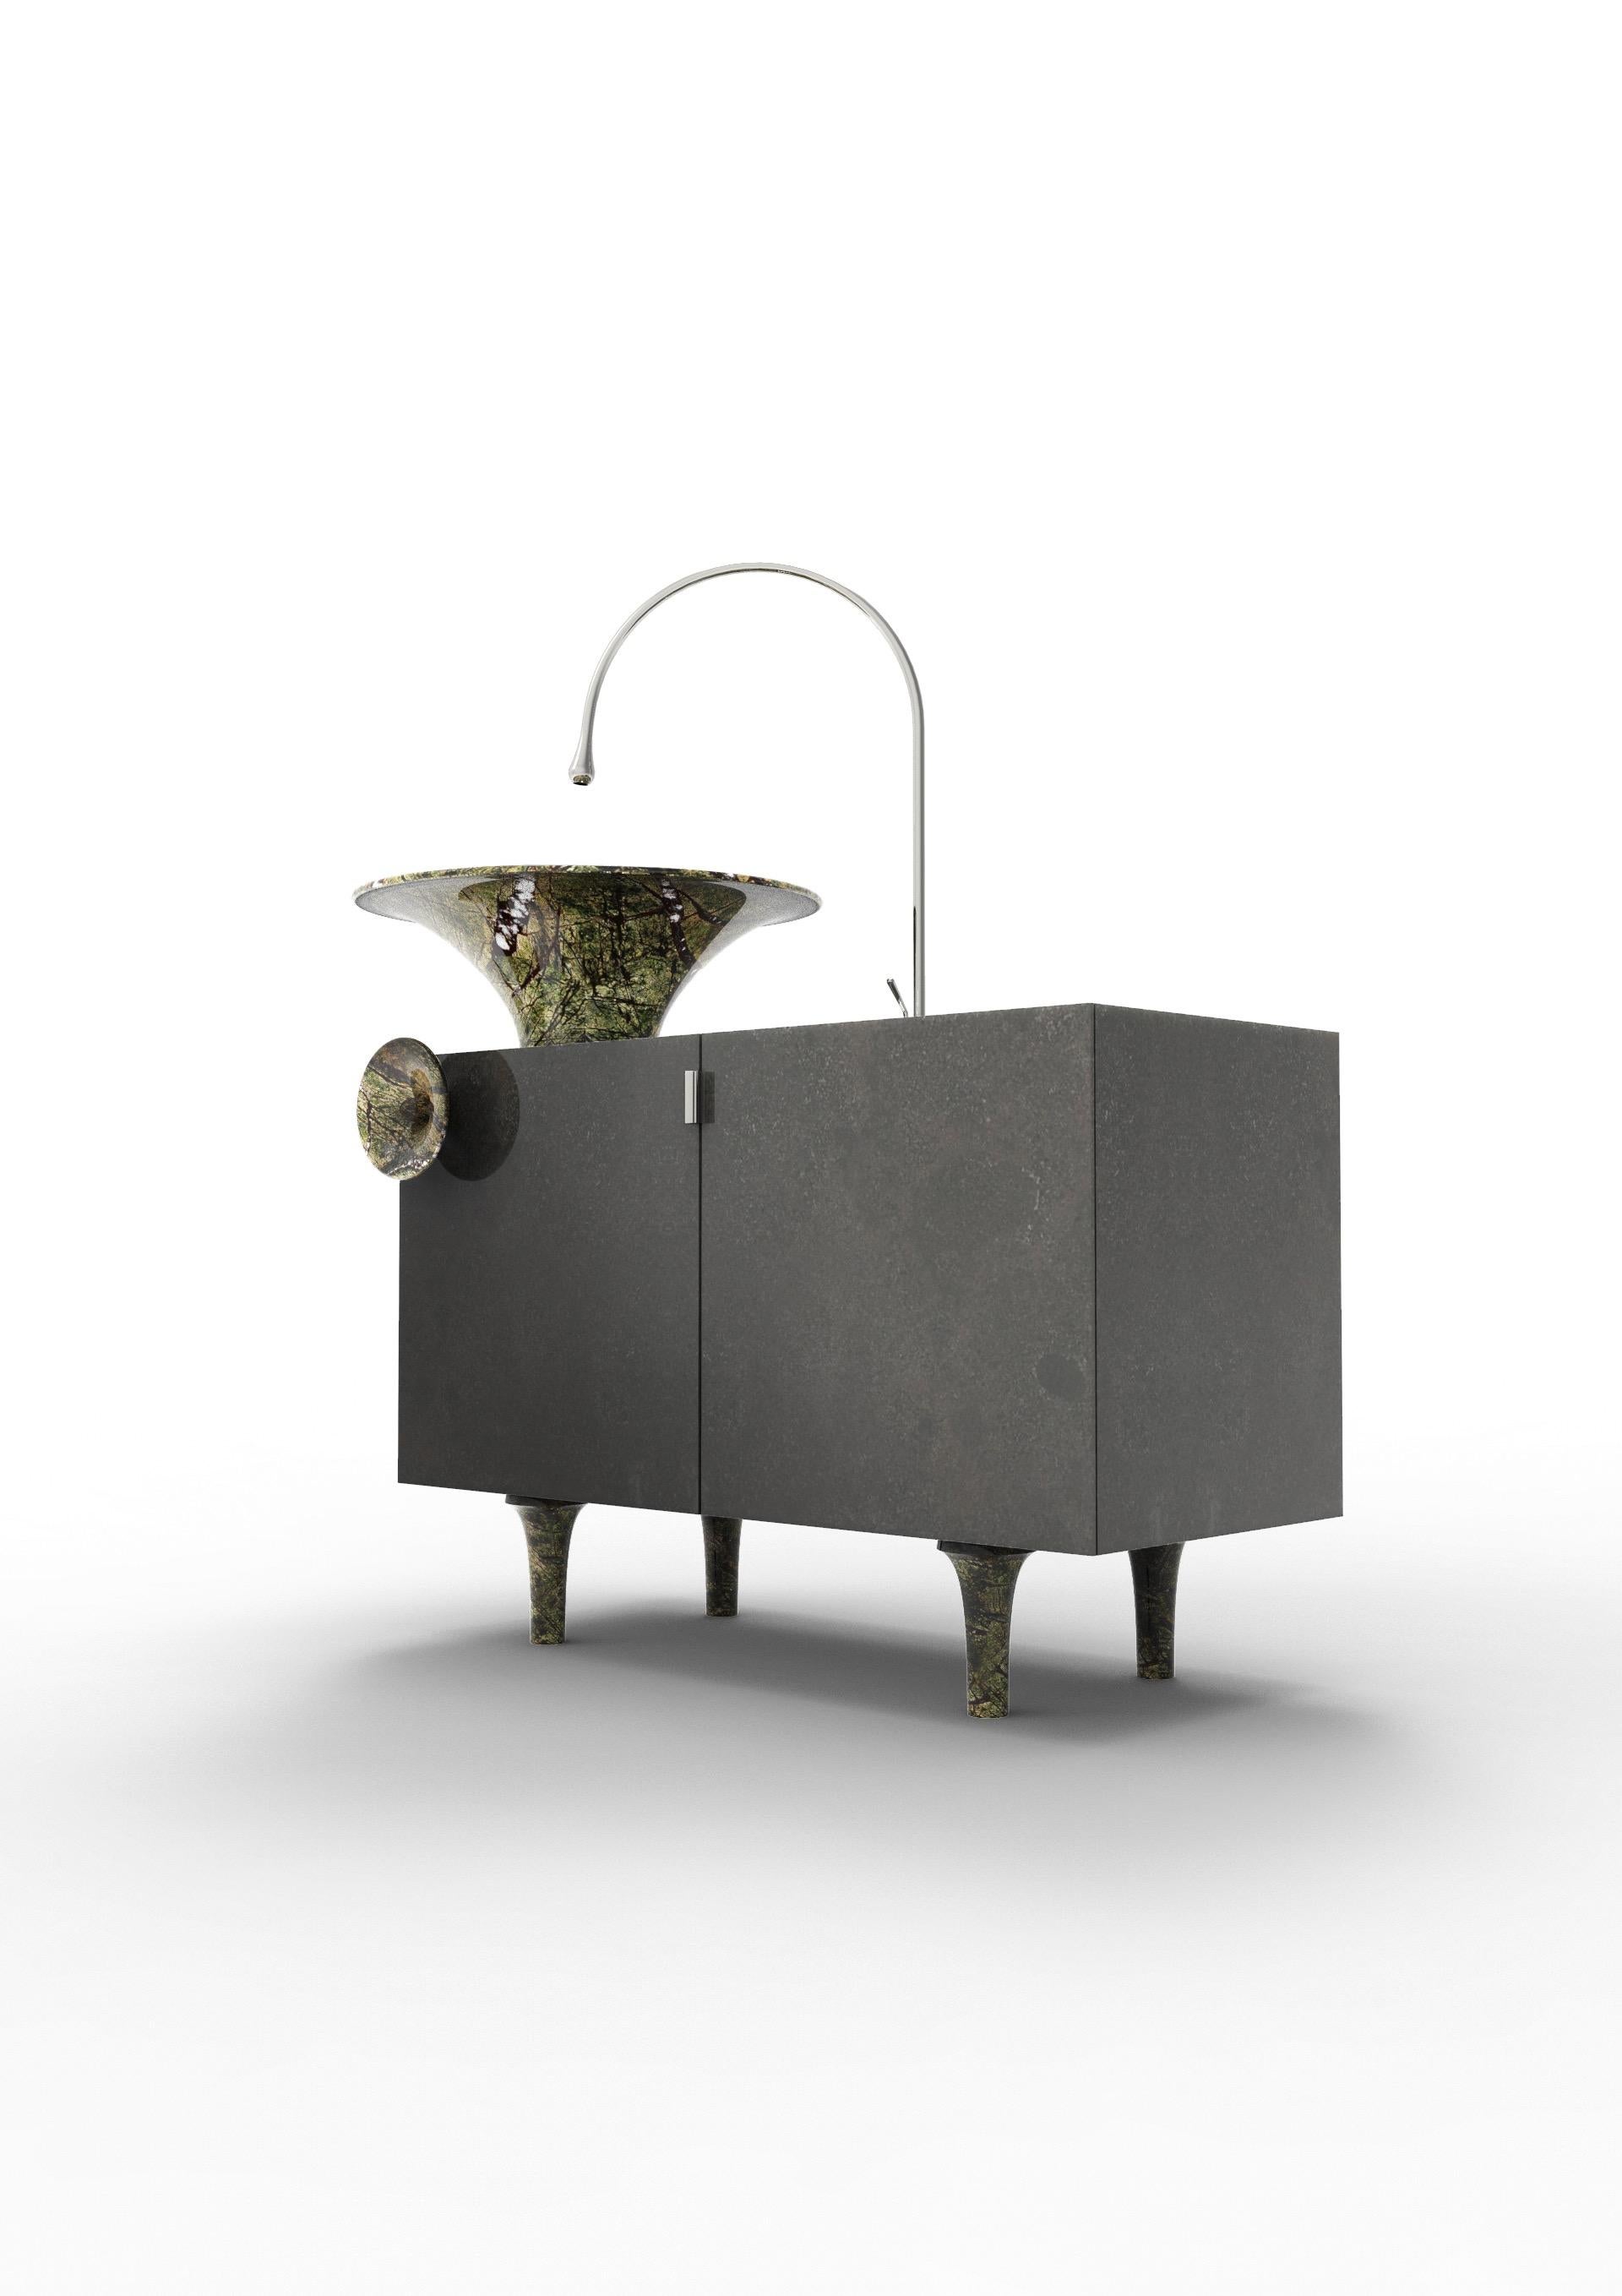 Circus washbasin and cabinet by Marmi Serafini
Materials: Sicily brown marble, Picasso green marble.
Dimensions: D 50 x W 110 x H 86 cm
Available in other marbles.
Tap not included.

Bathroom cabinet with a minimal and squared lines, strongly